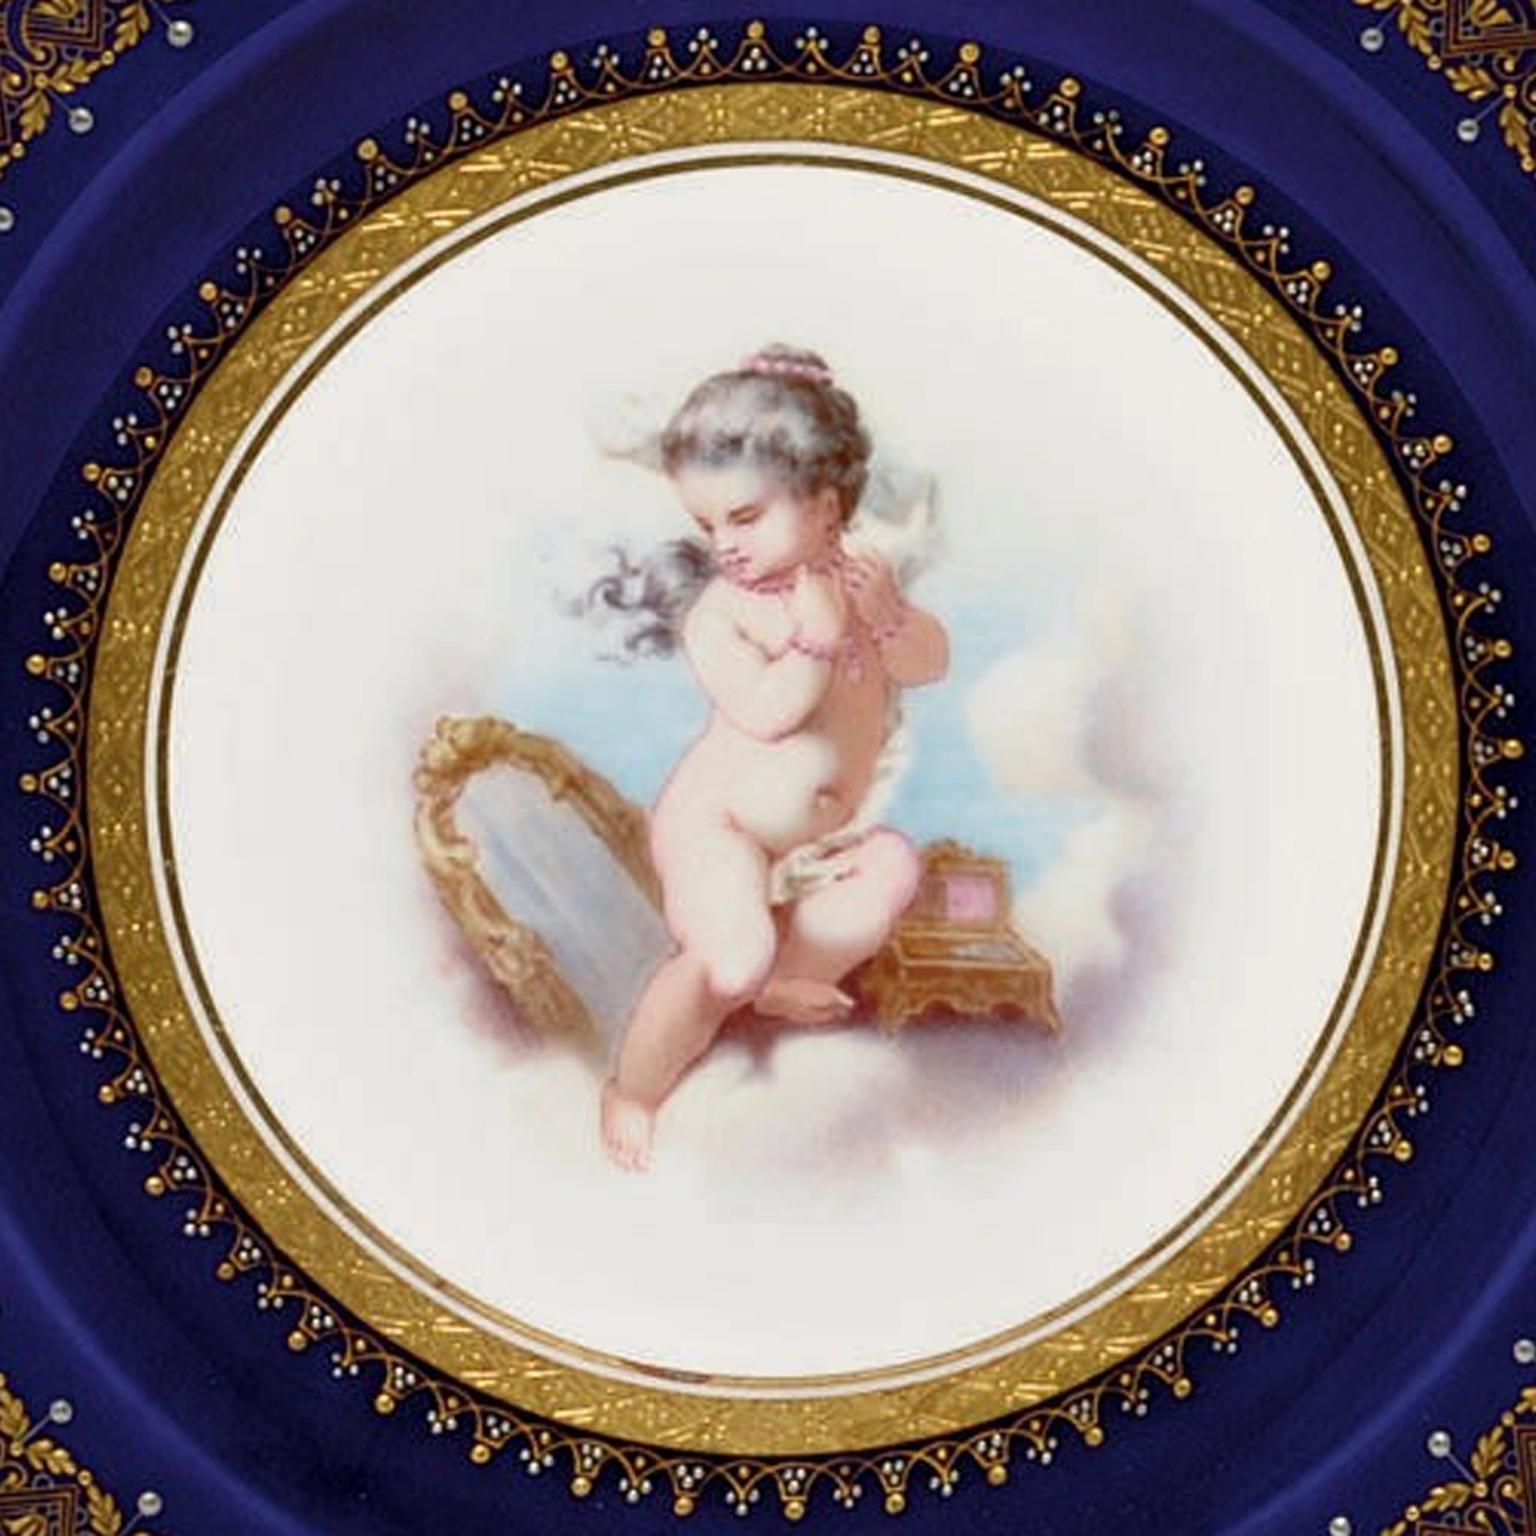 English Pair of Porcelain Plates Depicting Putto at Play by Minton, Dated 1881 For Sale